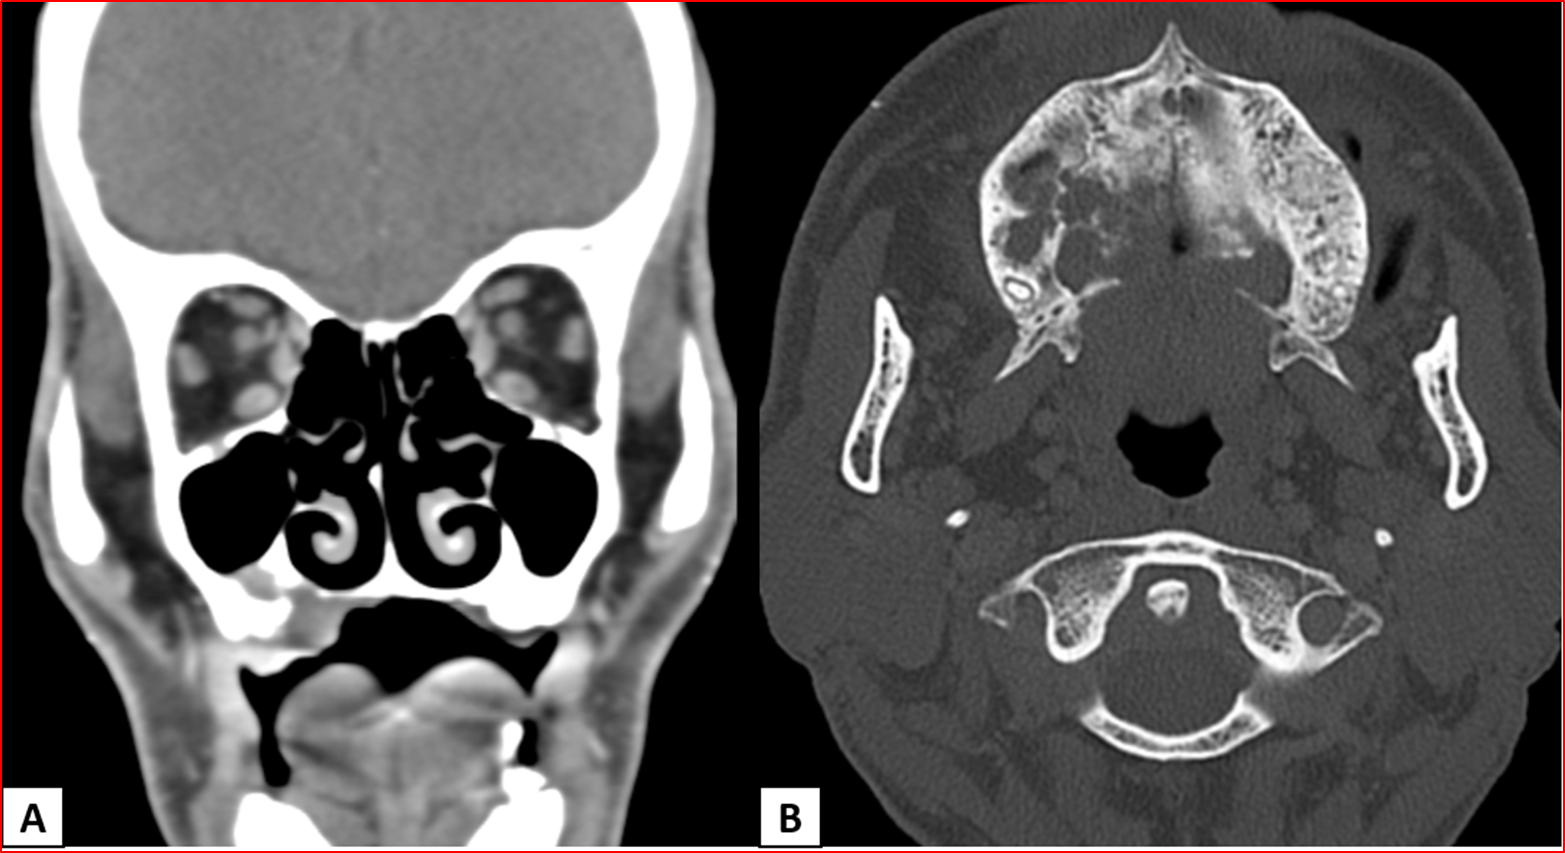 A 65-year-old with the history of right upper alveolus ulcer.